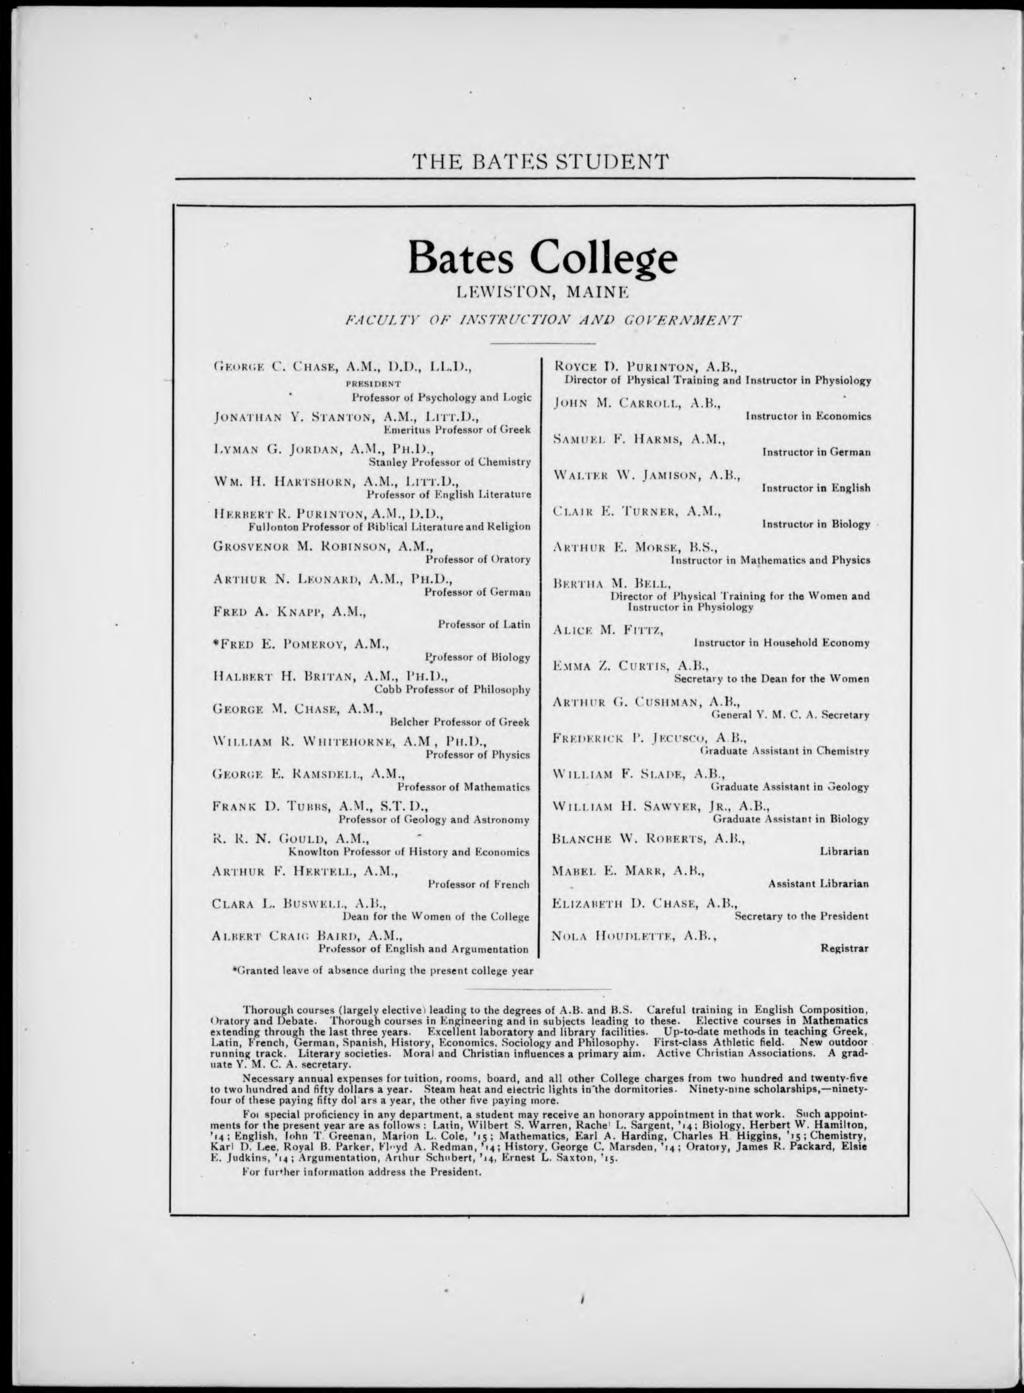 THE BATES STUDENT Bates College LEWISTON, MAINK FACULTY OF INSTRUCTION AND GOVERNMENT GEORGE C CHASE, A.M., D.D., I.I..D., PKBSIDBNT Professor of Psychology and Logic JONATHAN V. STANTON, A.M., LITT.